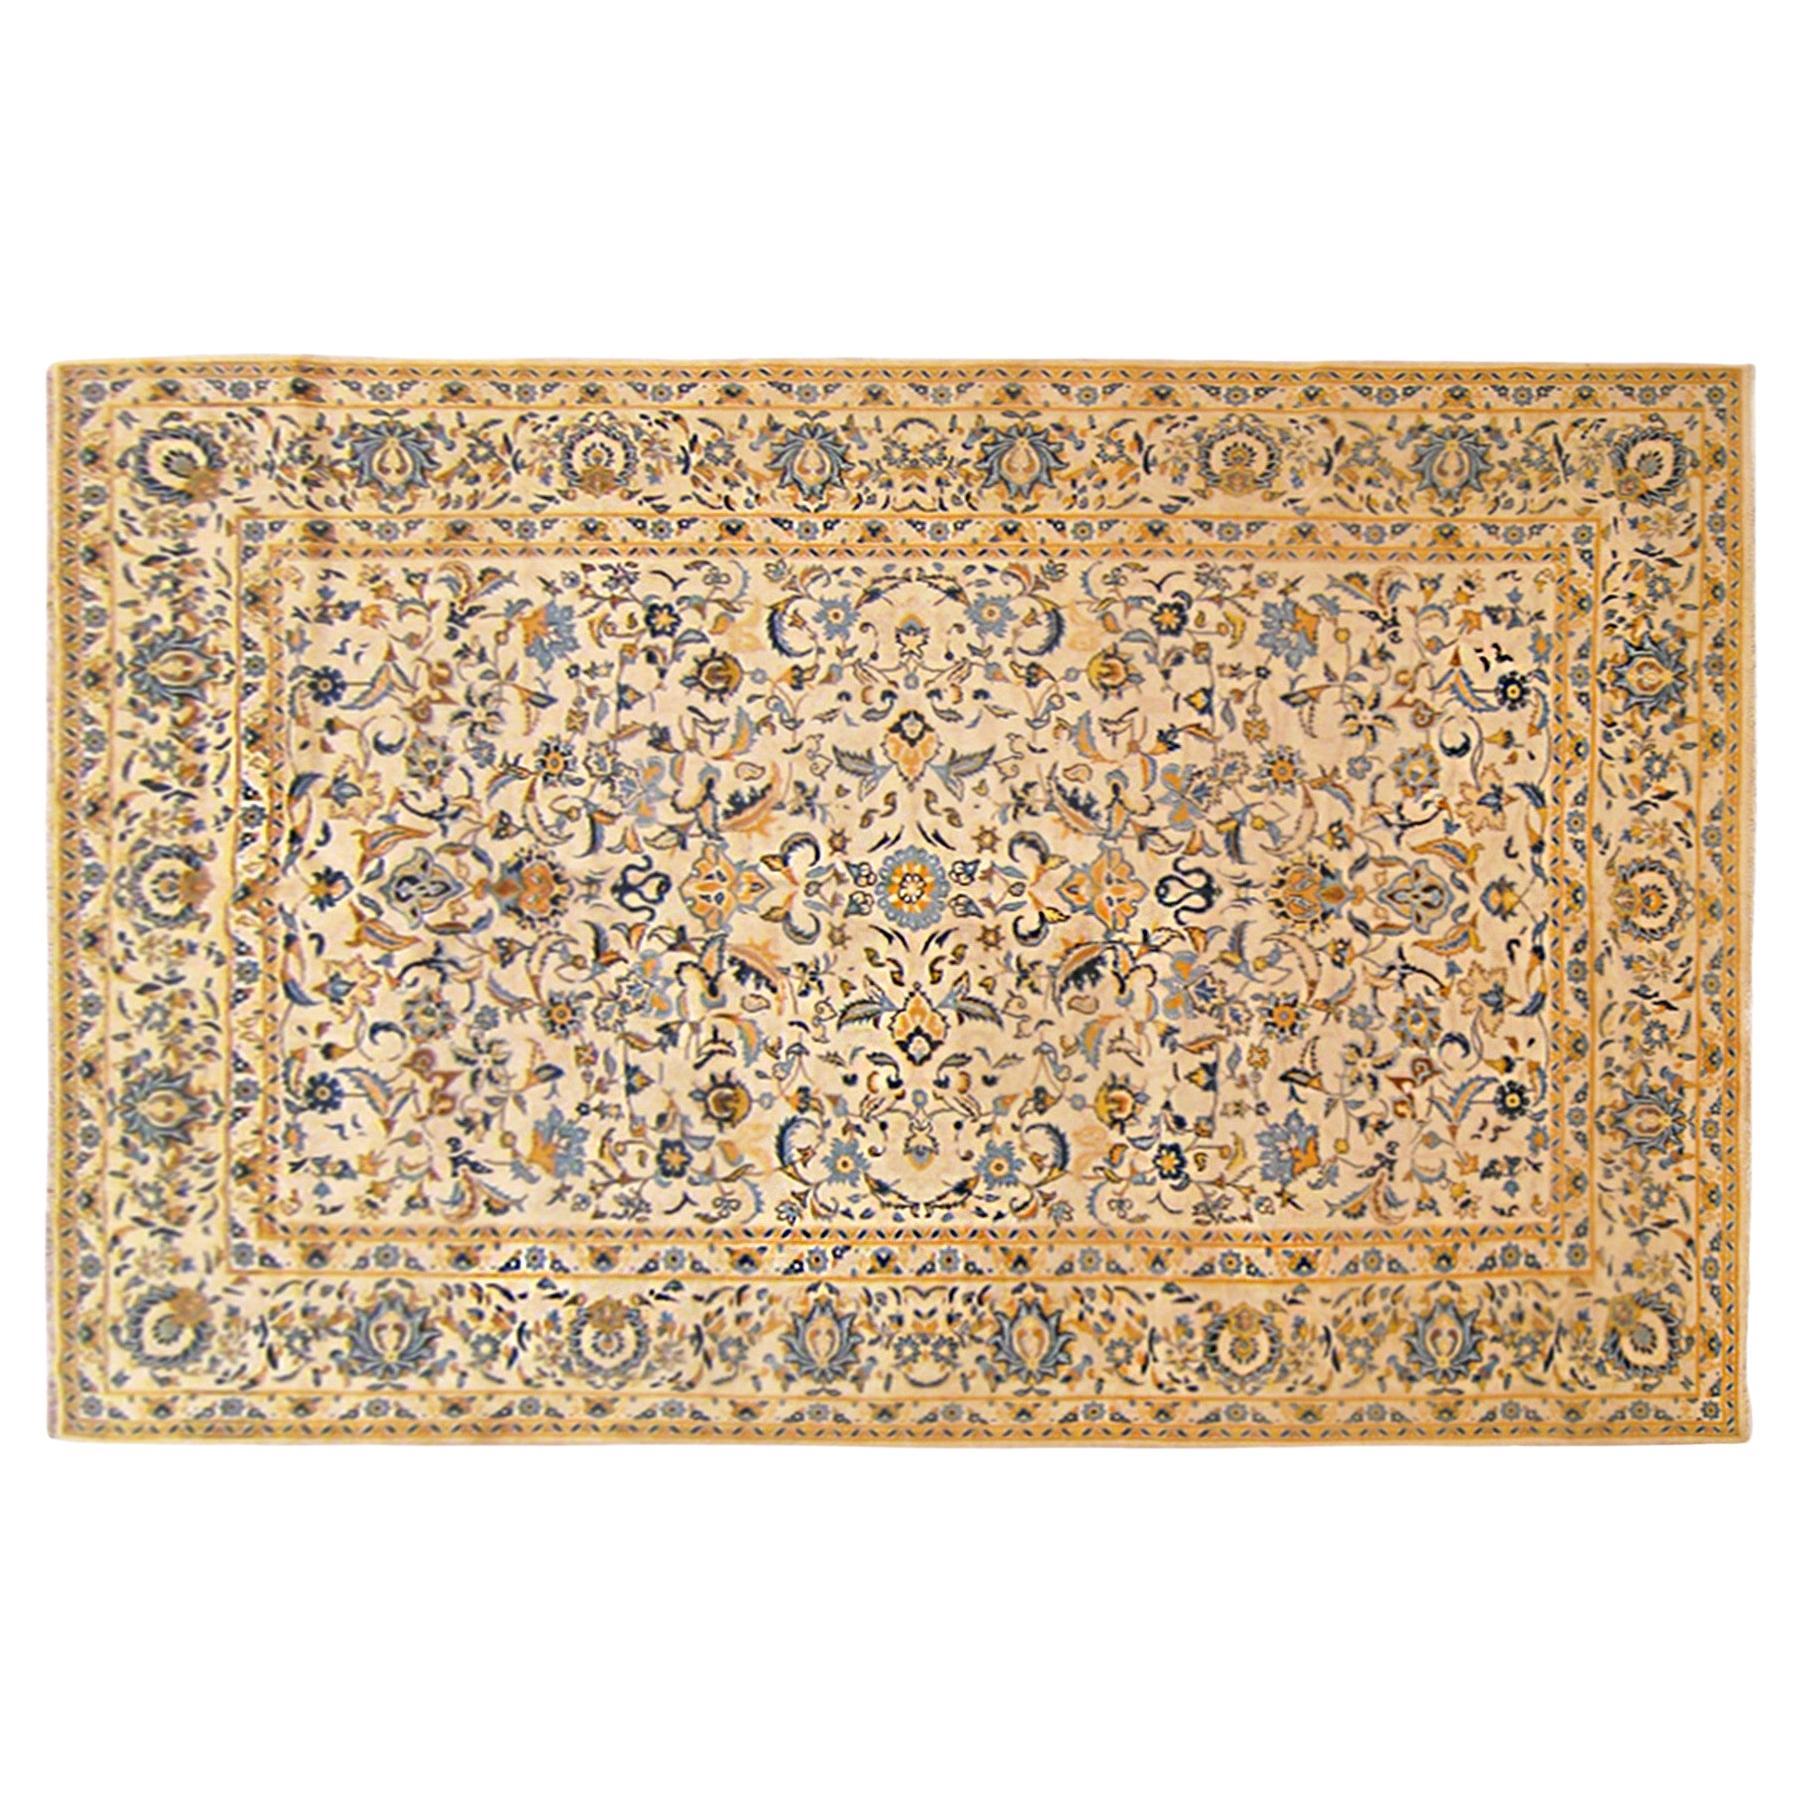 Vintage Persian Kashan Oriental Carpet, in Room size, with Floral Elements  For Sale